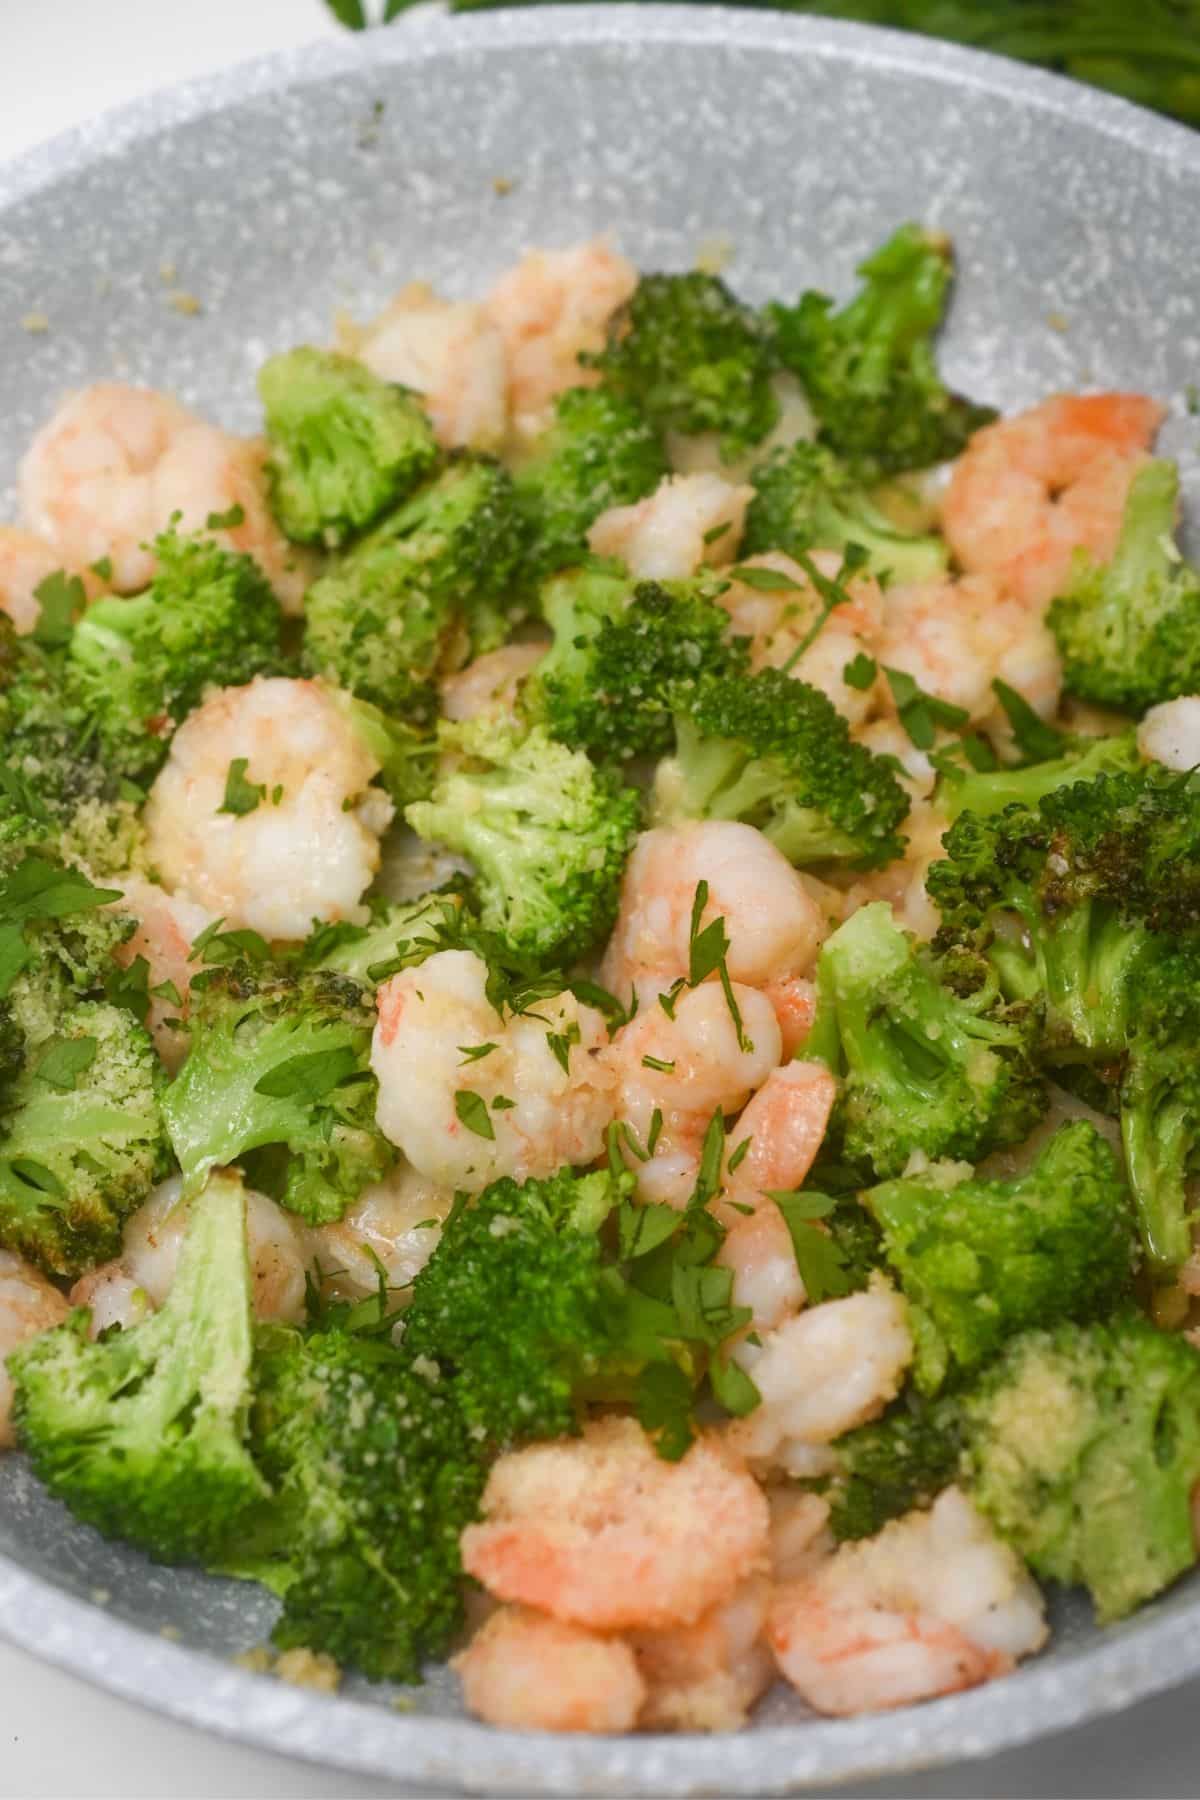 Shrimp and broccoli cooking